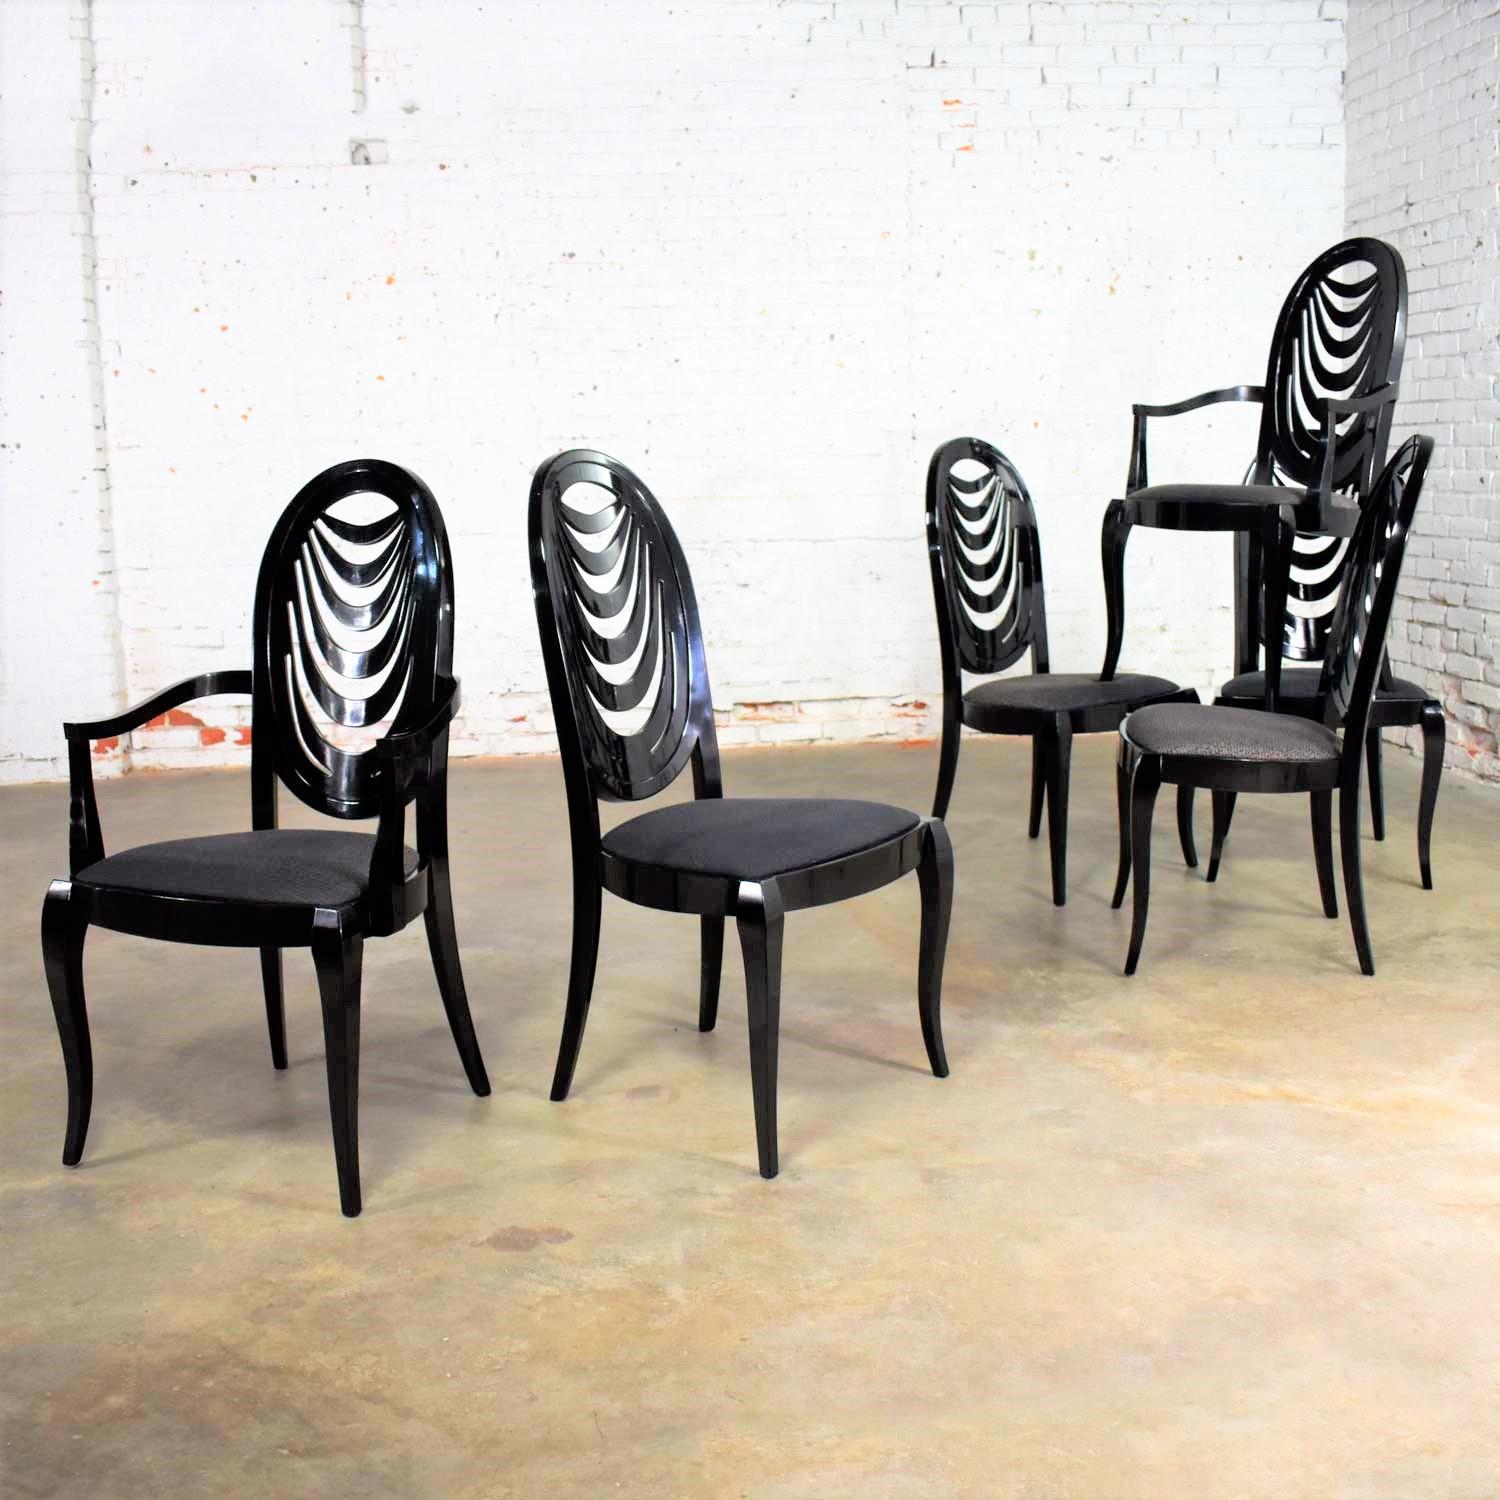 20th Century Black Lacquer Oval Drape Back Dining Chairs, Pietro Costantini for Ello Set of 6